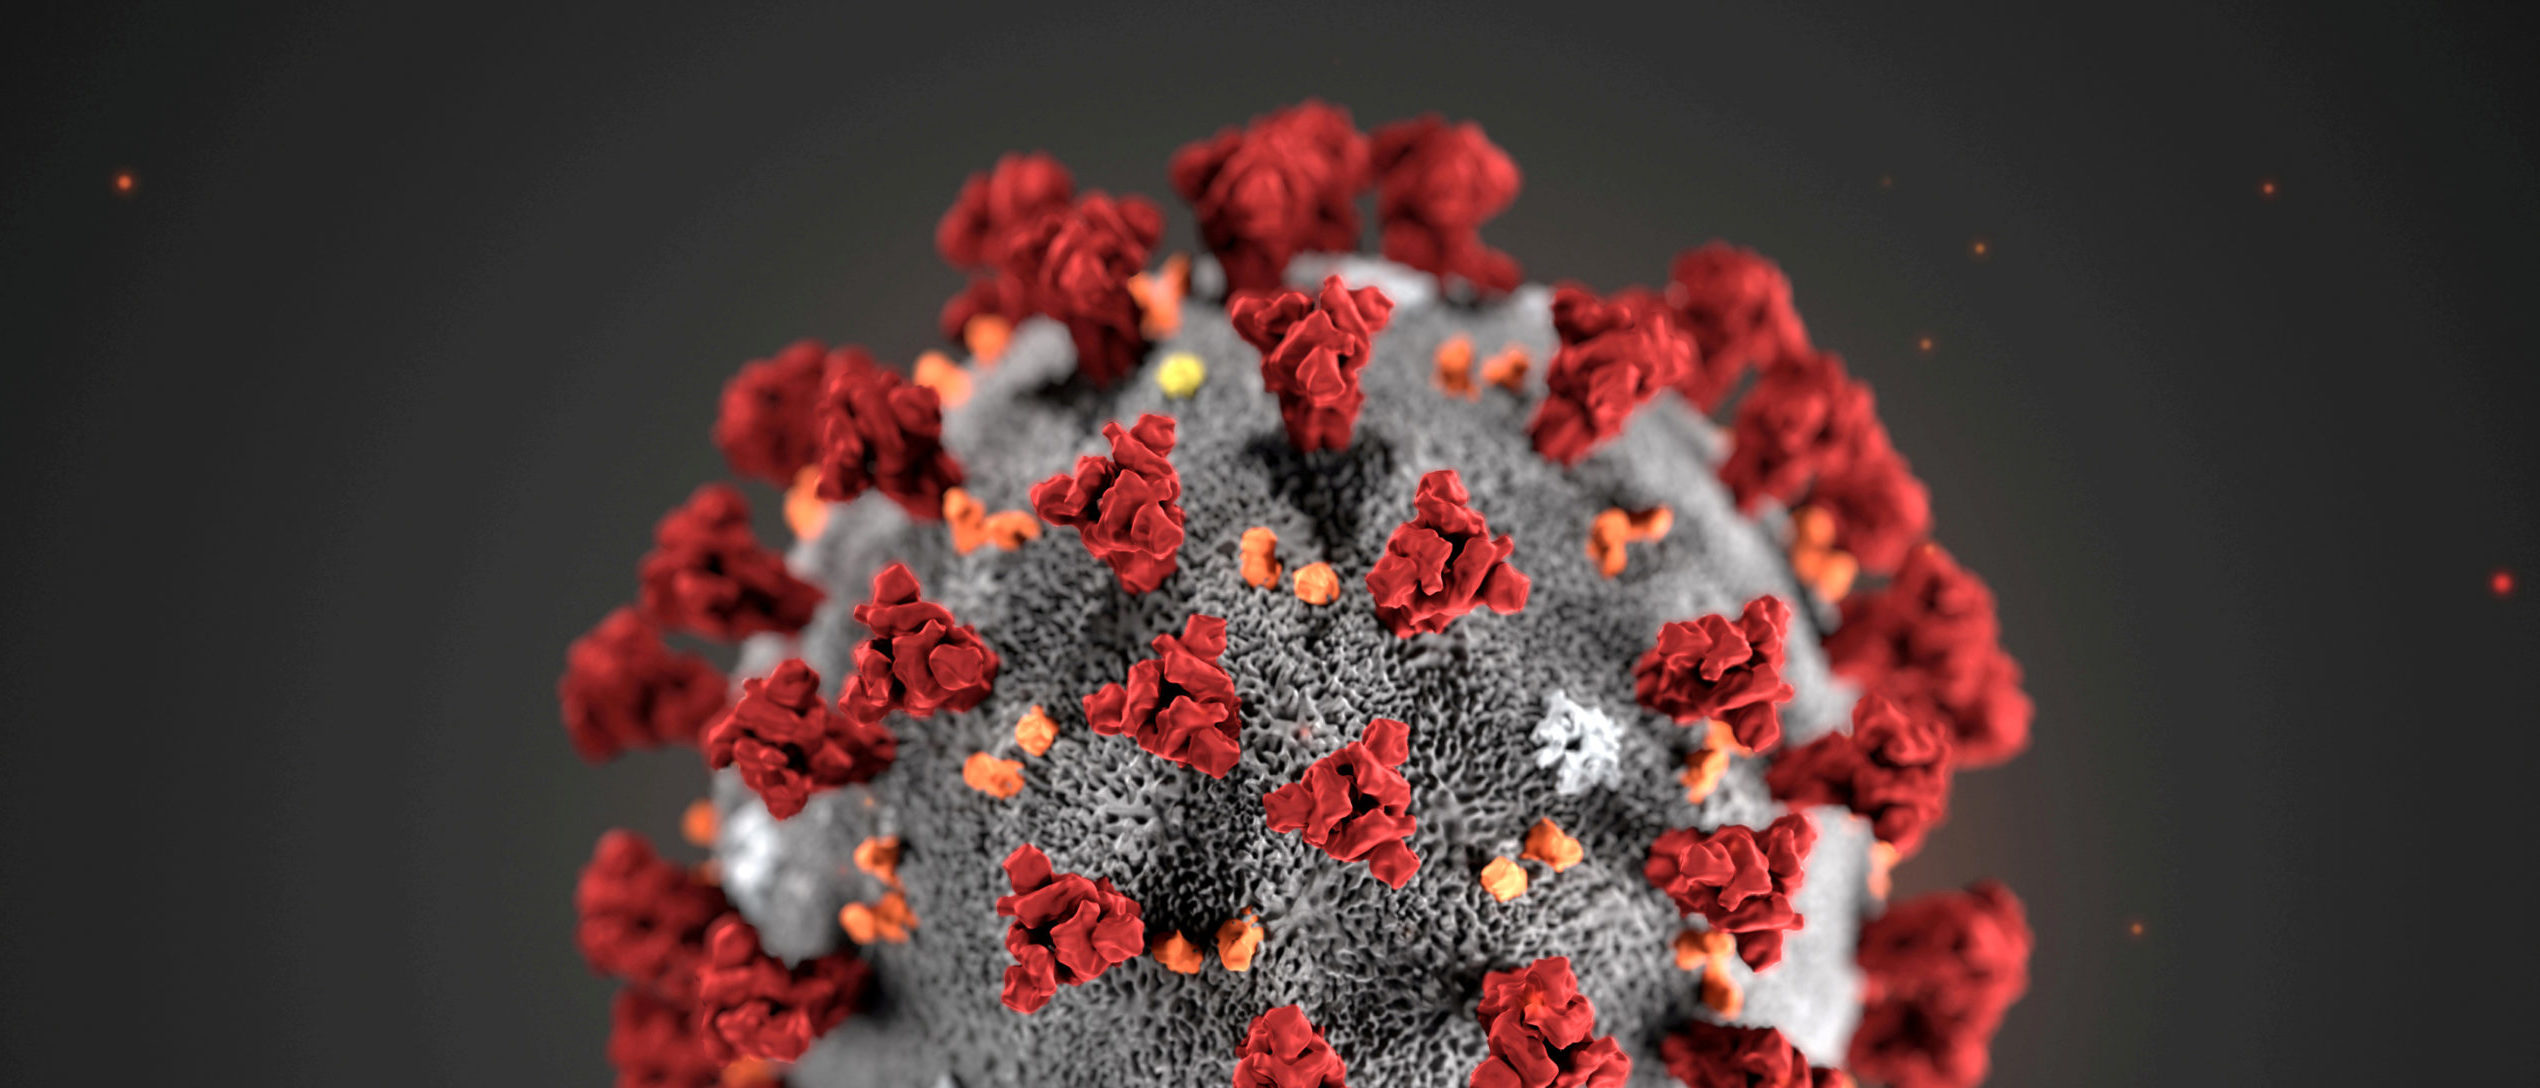 The ultrastructural morphology exhibited by the 2019 Novel Coronavirus (2019-nCoV), which was identified as the cause of an outbreak of respiratory illness first detected in Wuhan, China, is seen in an illustration released by the Centers for Disease Control and Prevention (CDC) in Atlanta, Georgia, U.S. January 29, 2020. Alissa Eckert, MS; Dan Higgins, MAM/CDC/Handout via REUTERS.